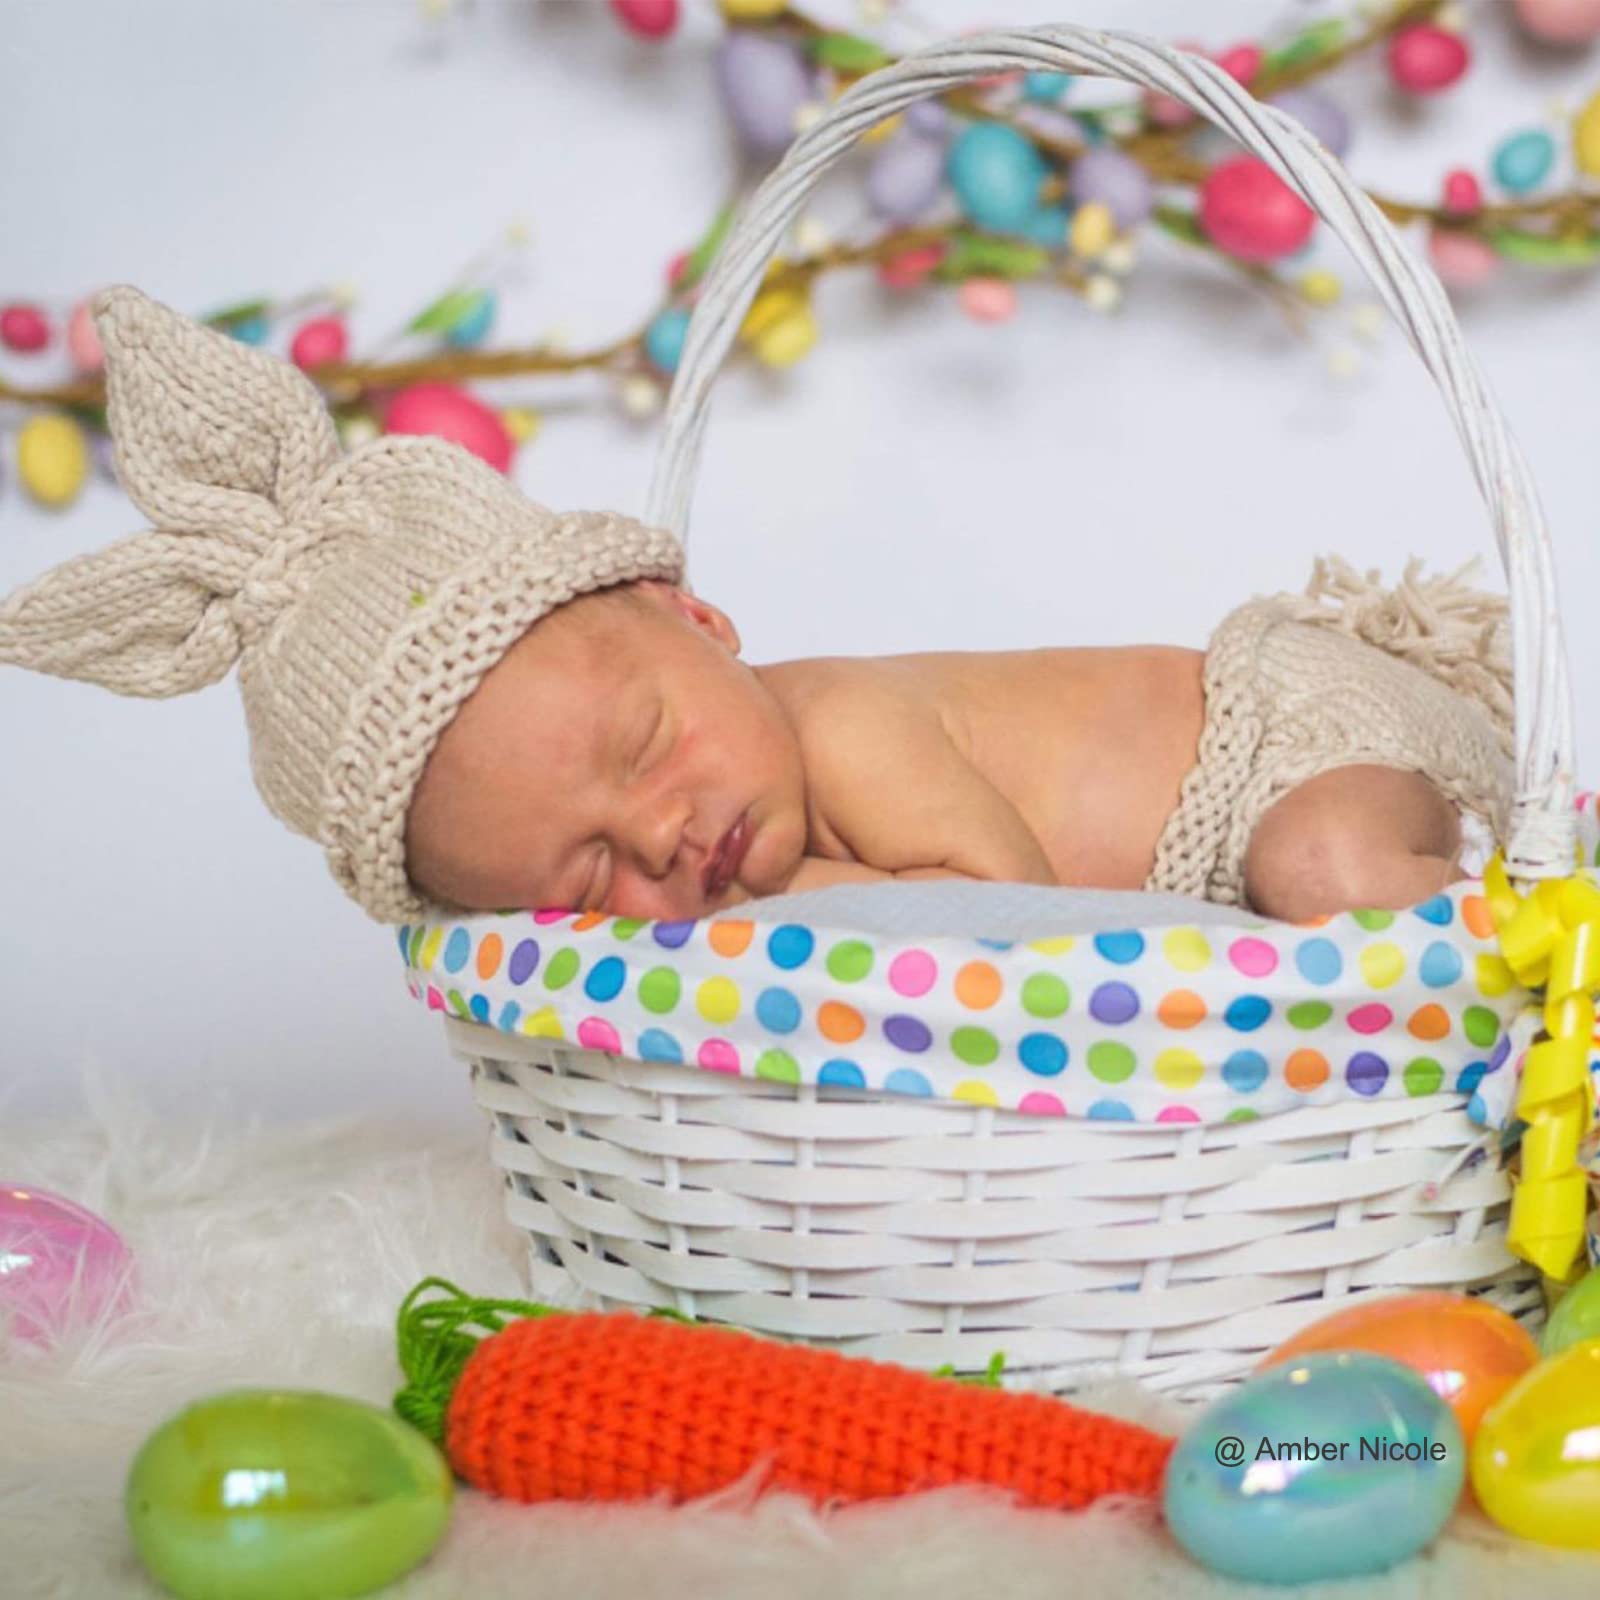 ISOCUTE Newborn Photography Props Baby Easter Bunny Outfits Handmade Crochet Rabbit Set